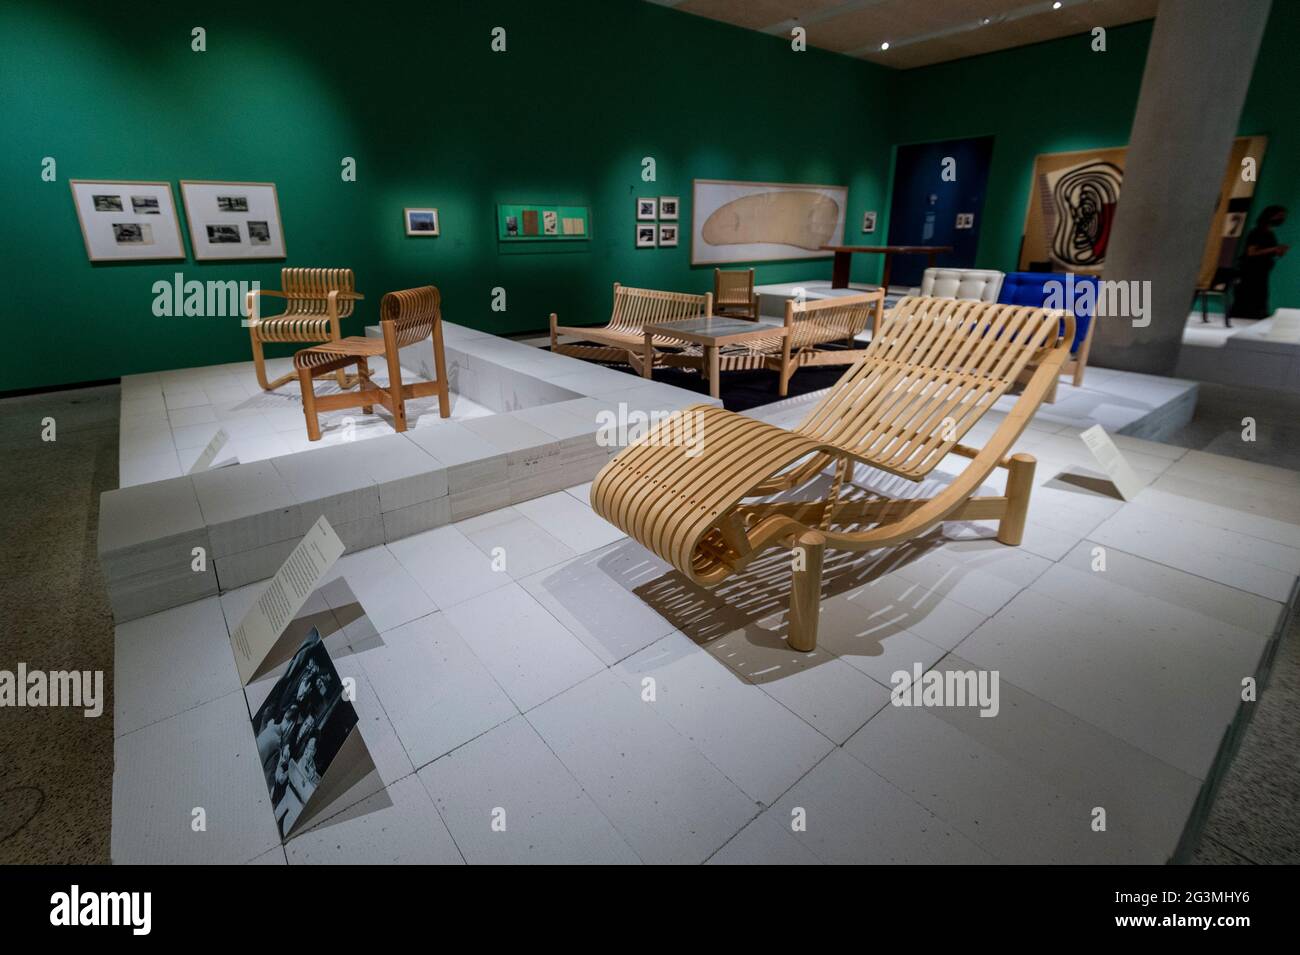 London, UK. 17 June 2021. Cantilever bamboo chair, 1940. Preview of “Charlotte  Perriand: The Modern Life” exhibition at the Design Museum in Kensington. Charlotte  Perriand's (1903-1999) pioneering furniture designs shaped the 20th